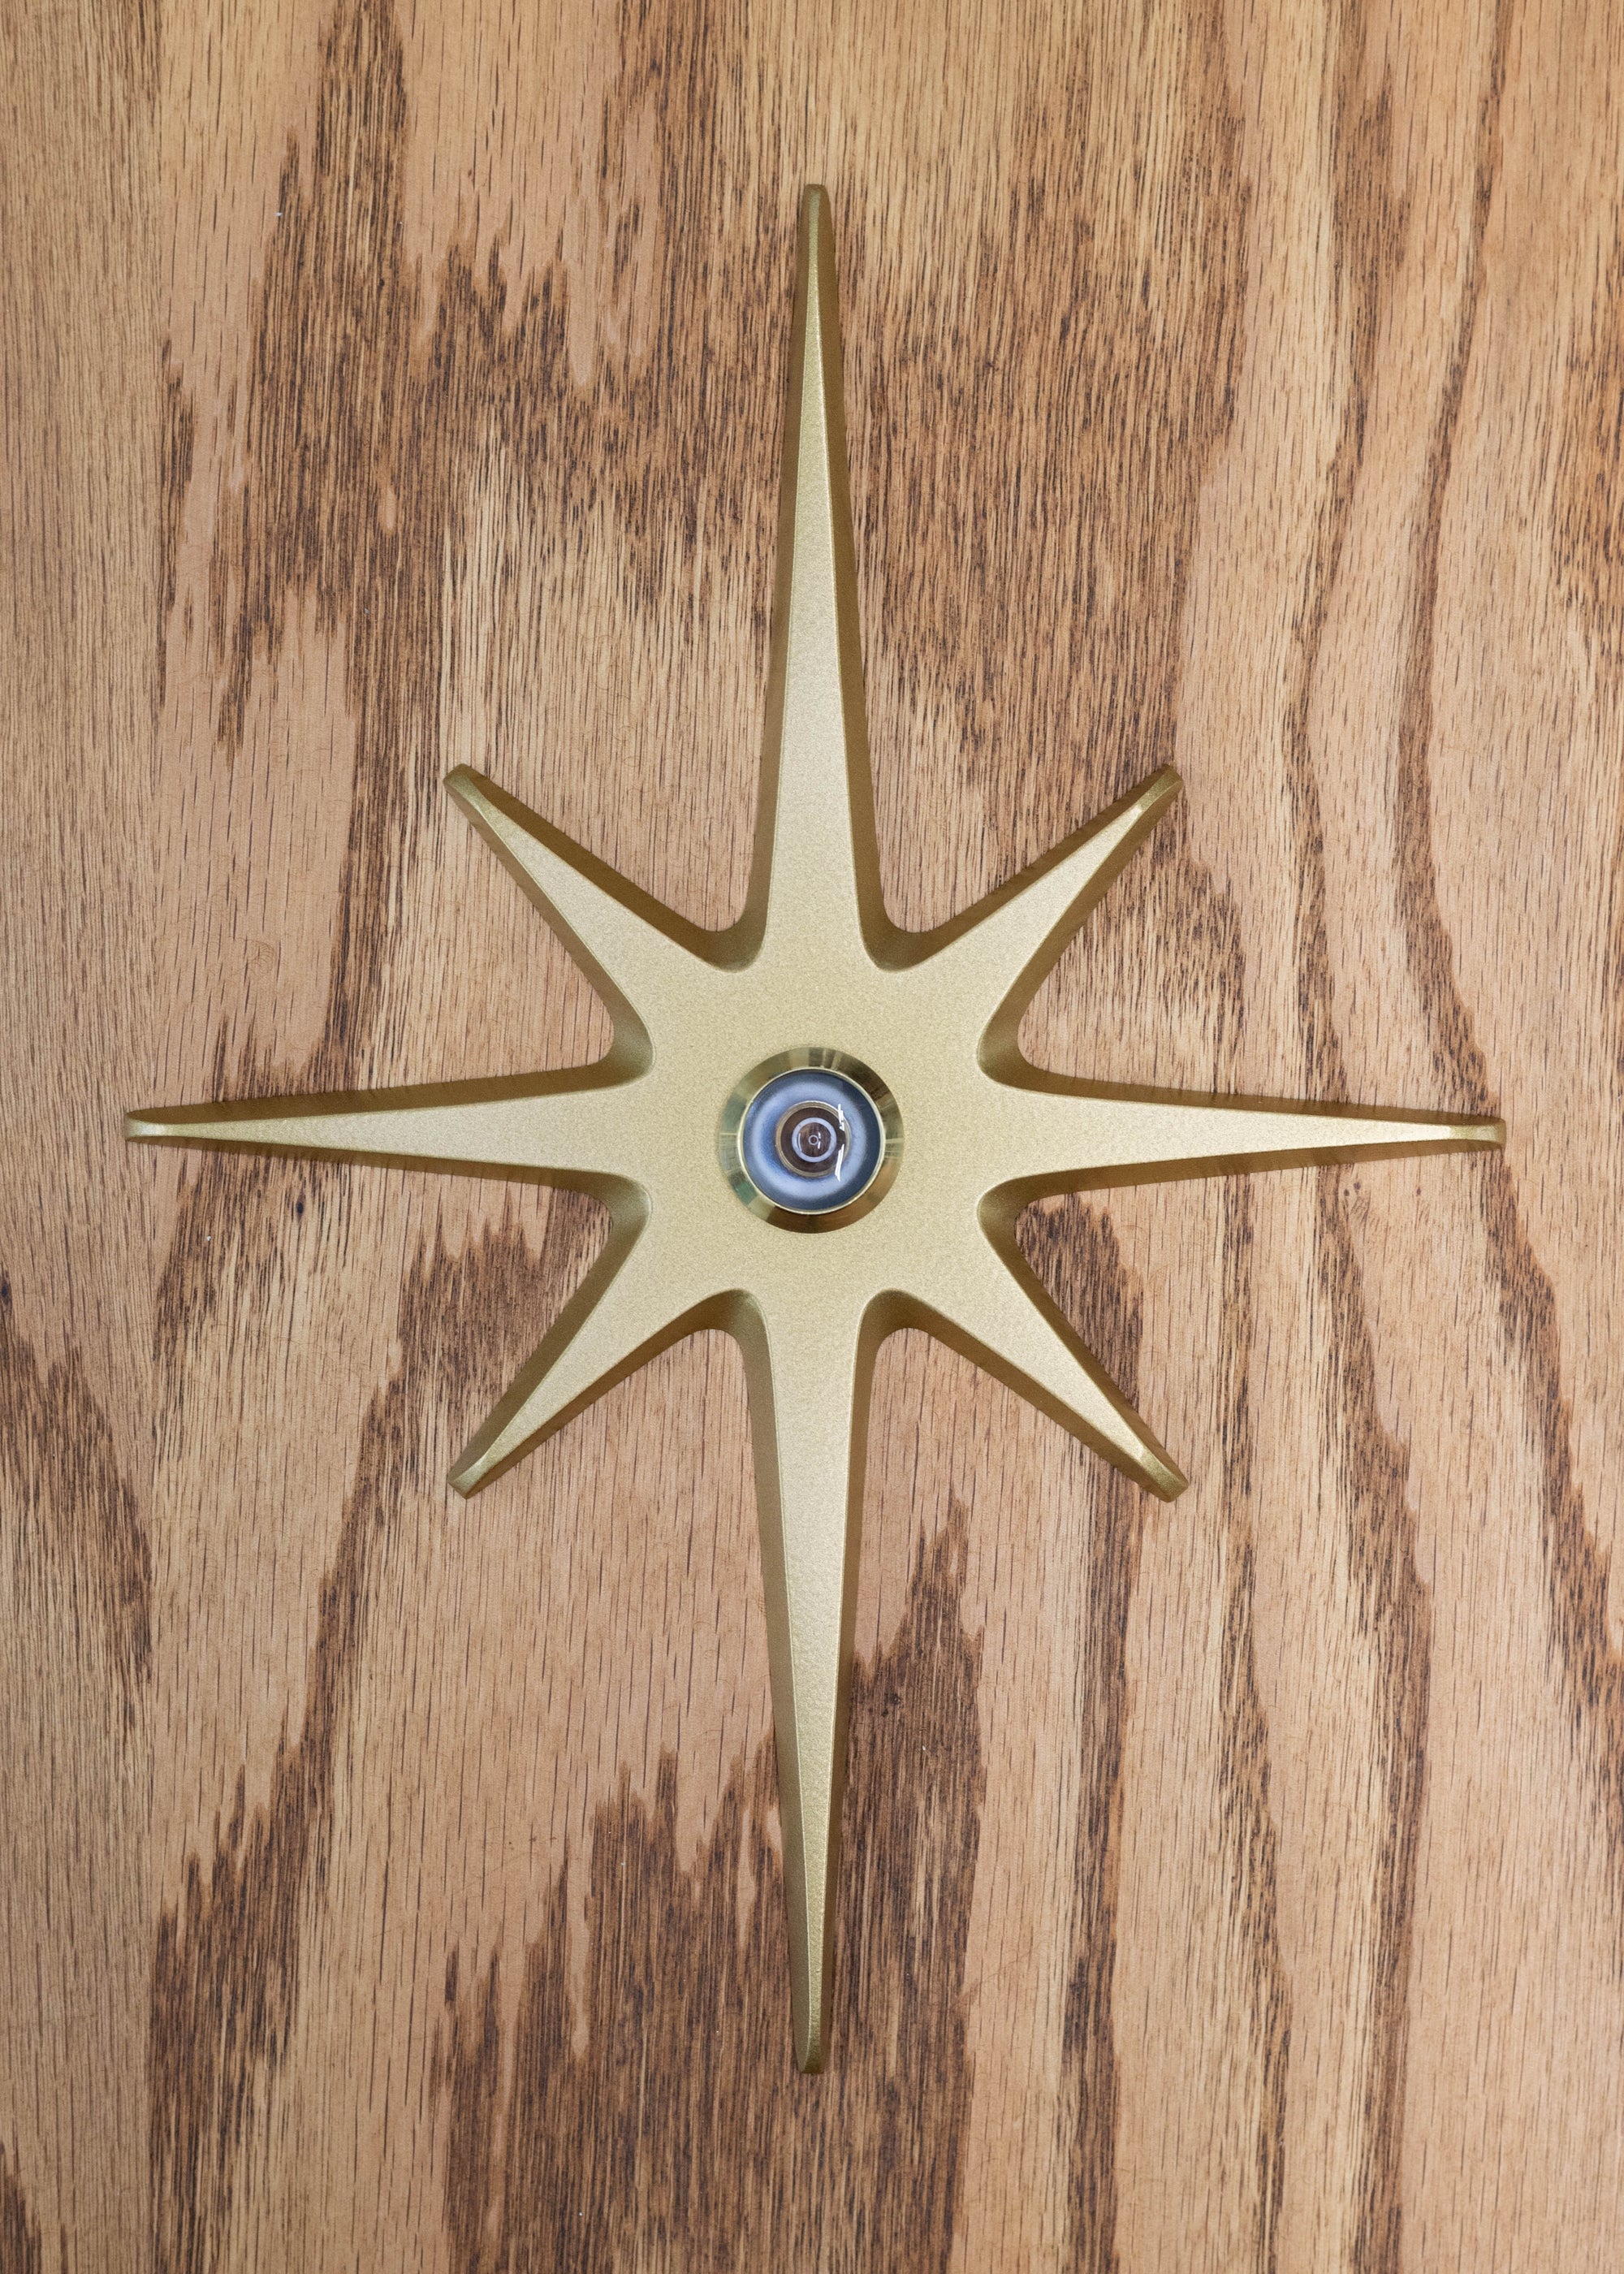 A large cast aluminum starburst with a peephole viewer at its center. It is gold powder coated with a gold rimmed peephole. The powder coating provides a smooth finish with slight metallic shine to it.